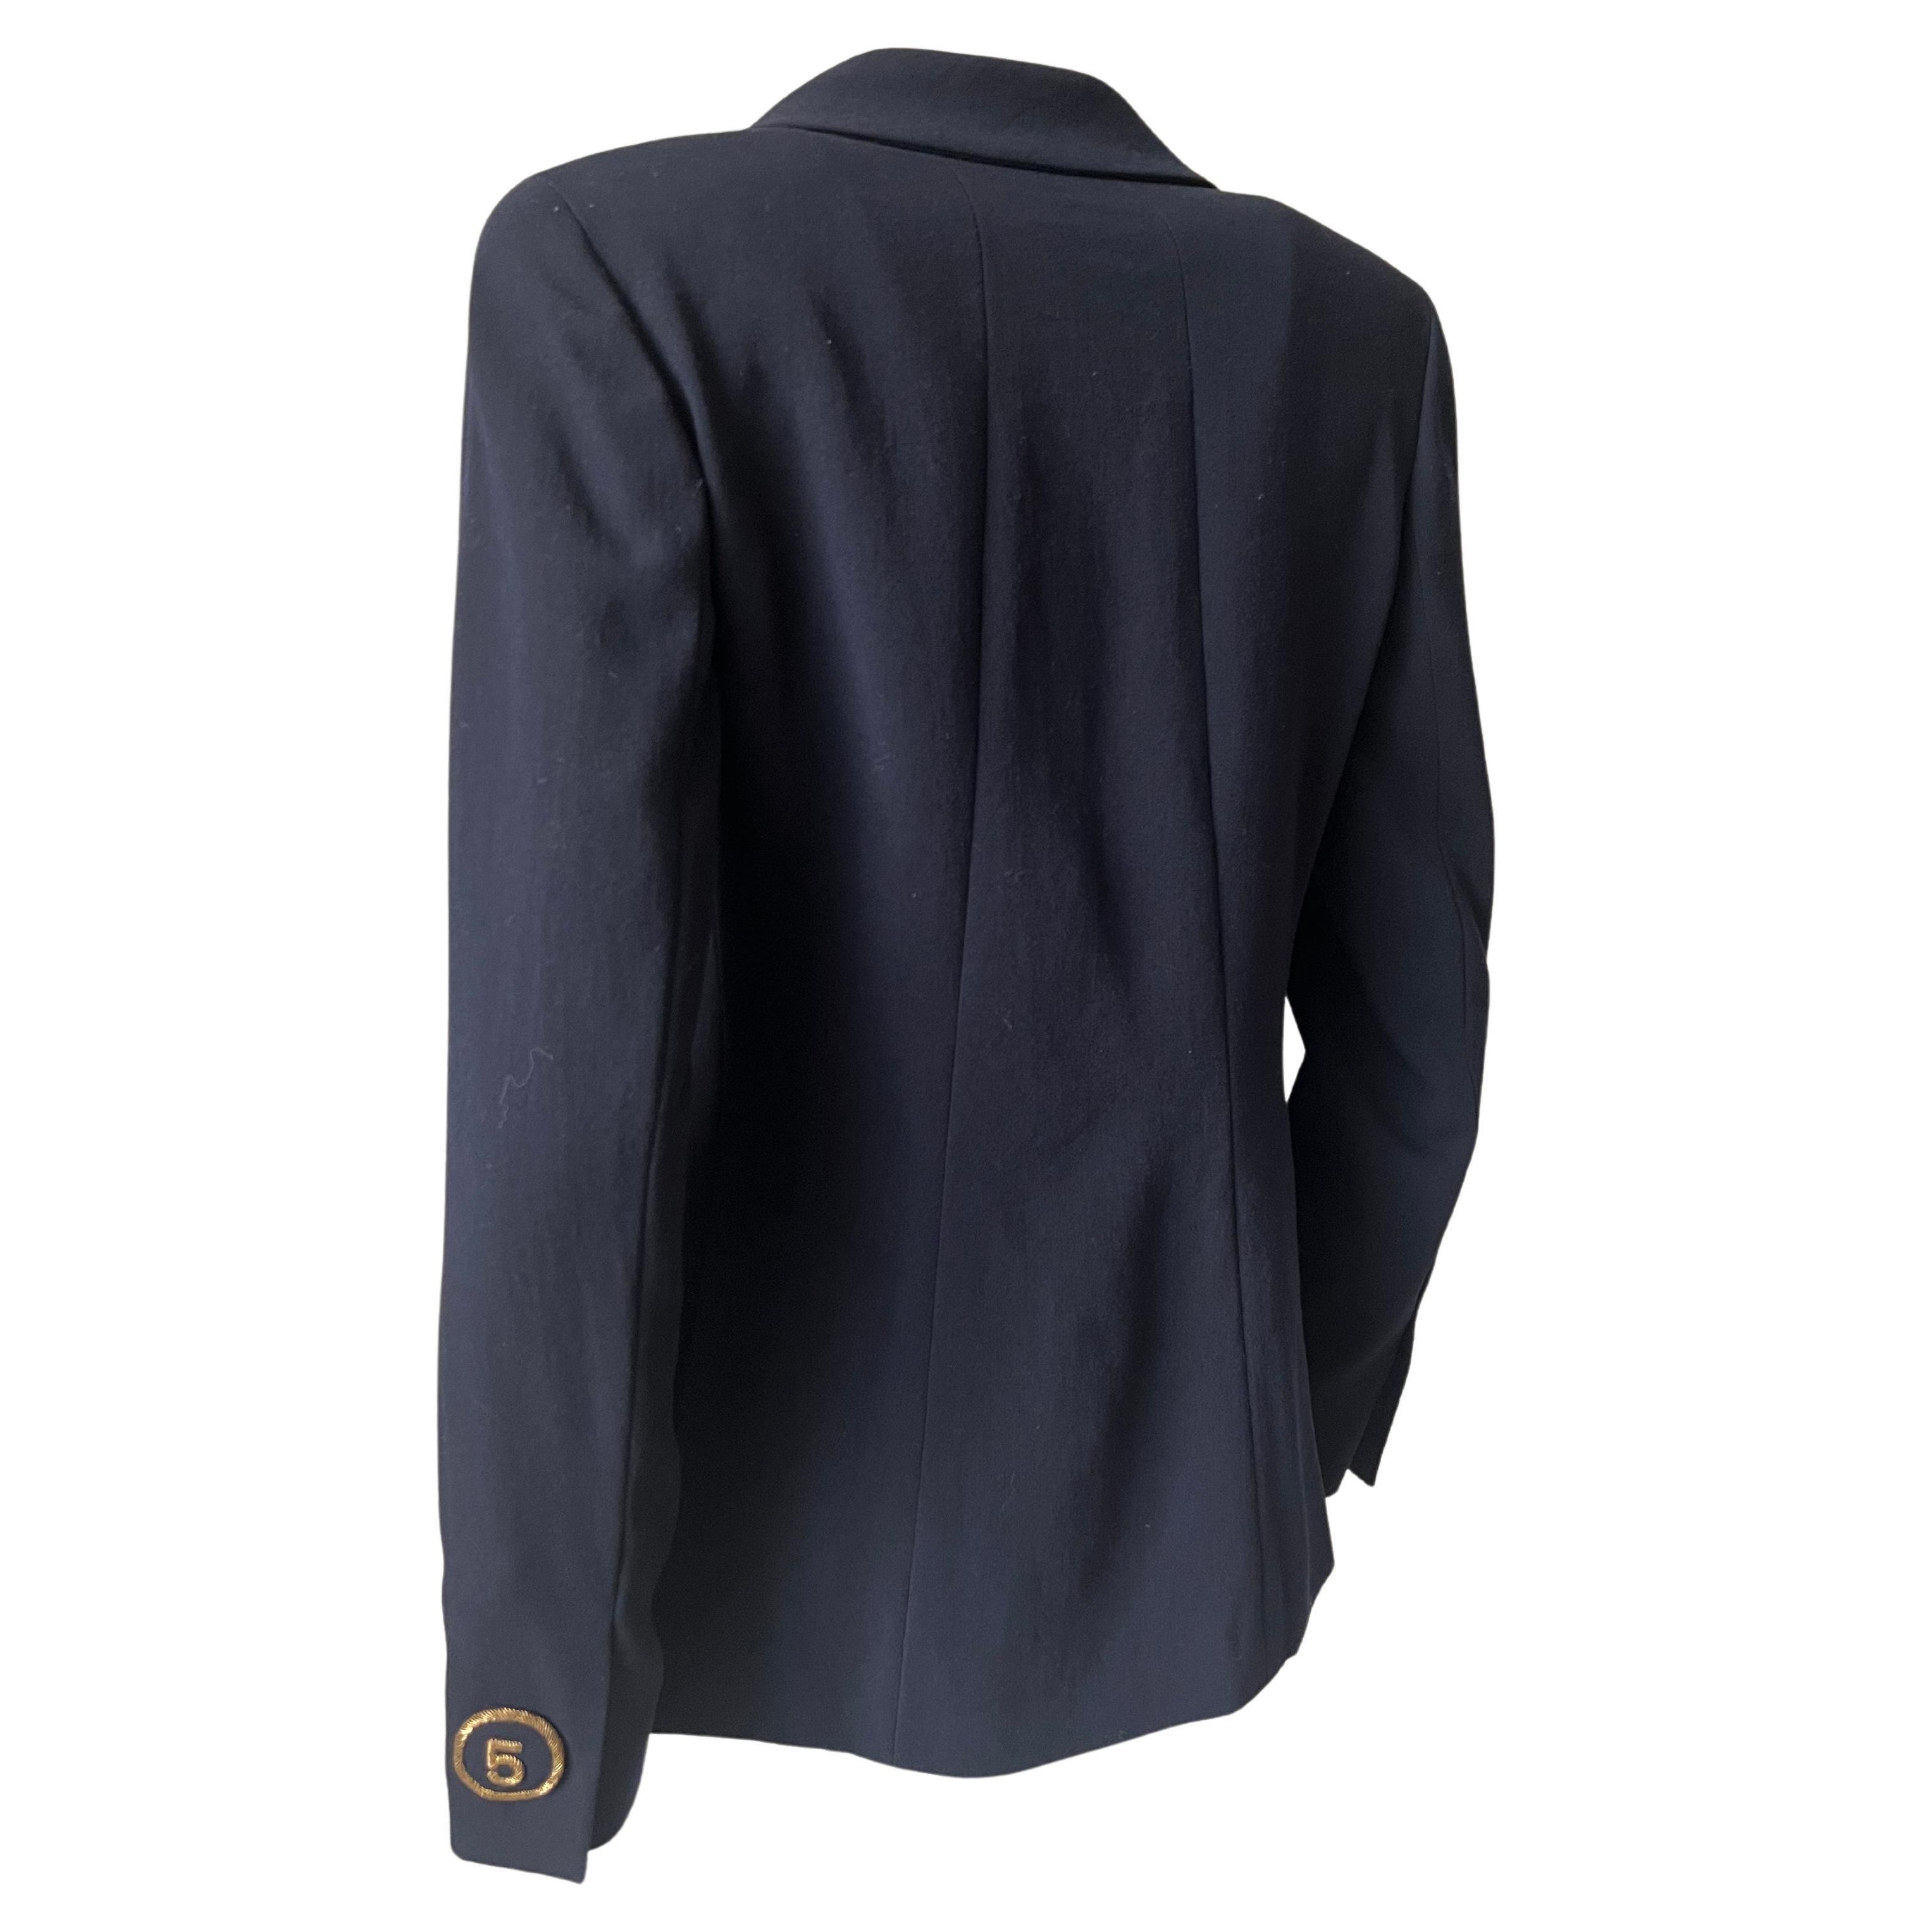 Pretty navy blue blazer, gold butt marked Chanel, shields embroidered with gold thread with brand logos on the back of each sleeve. Very elegant and timeless.